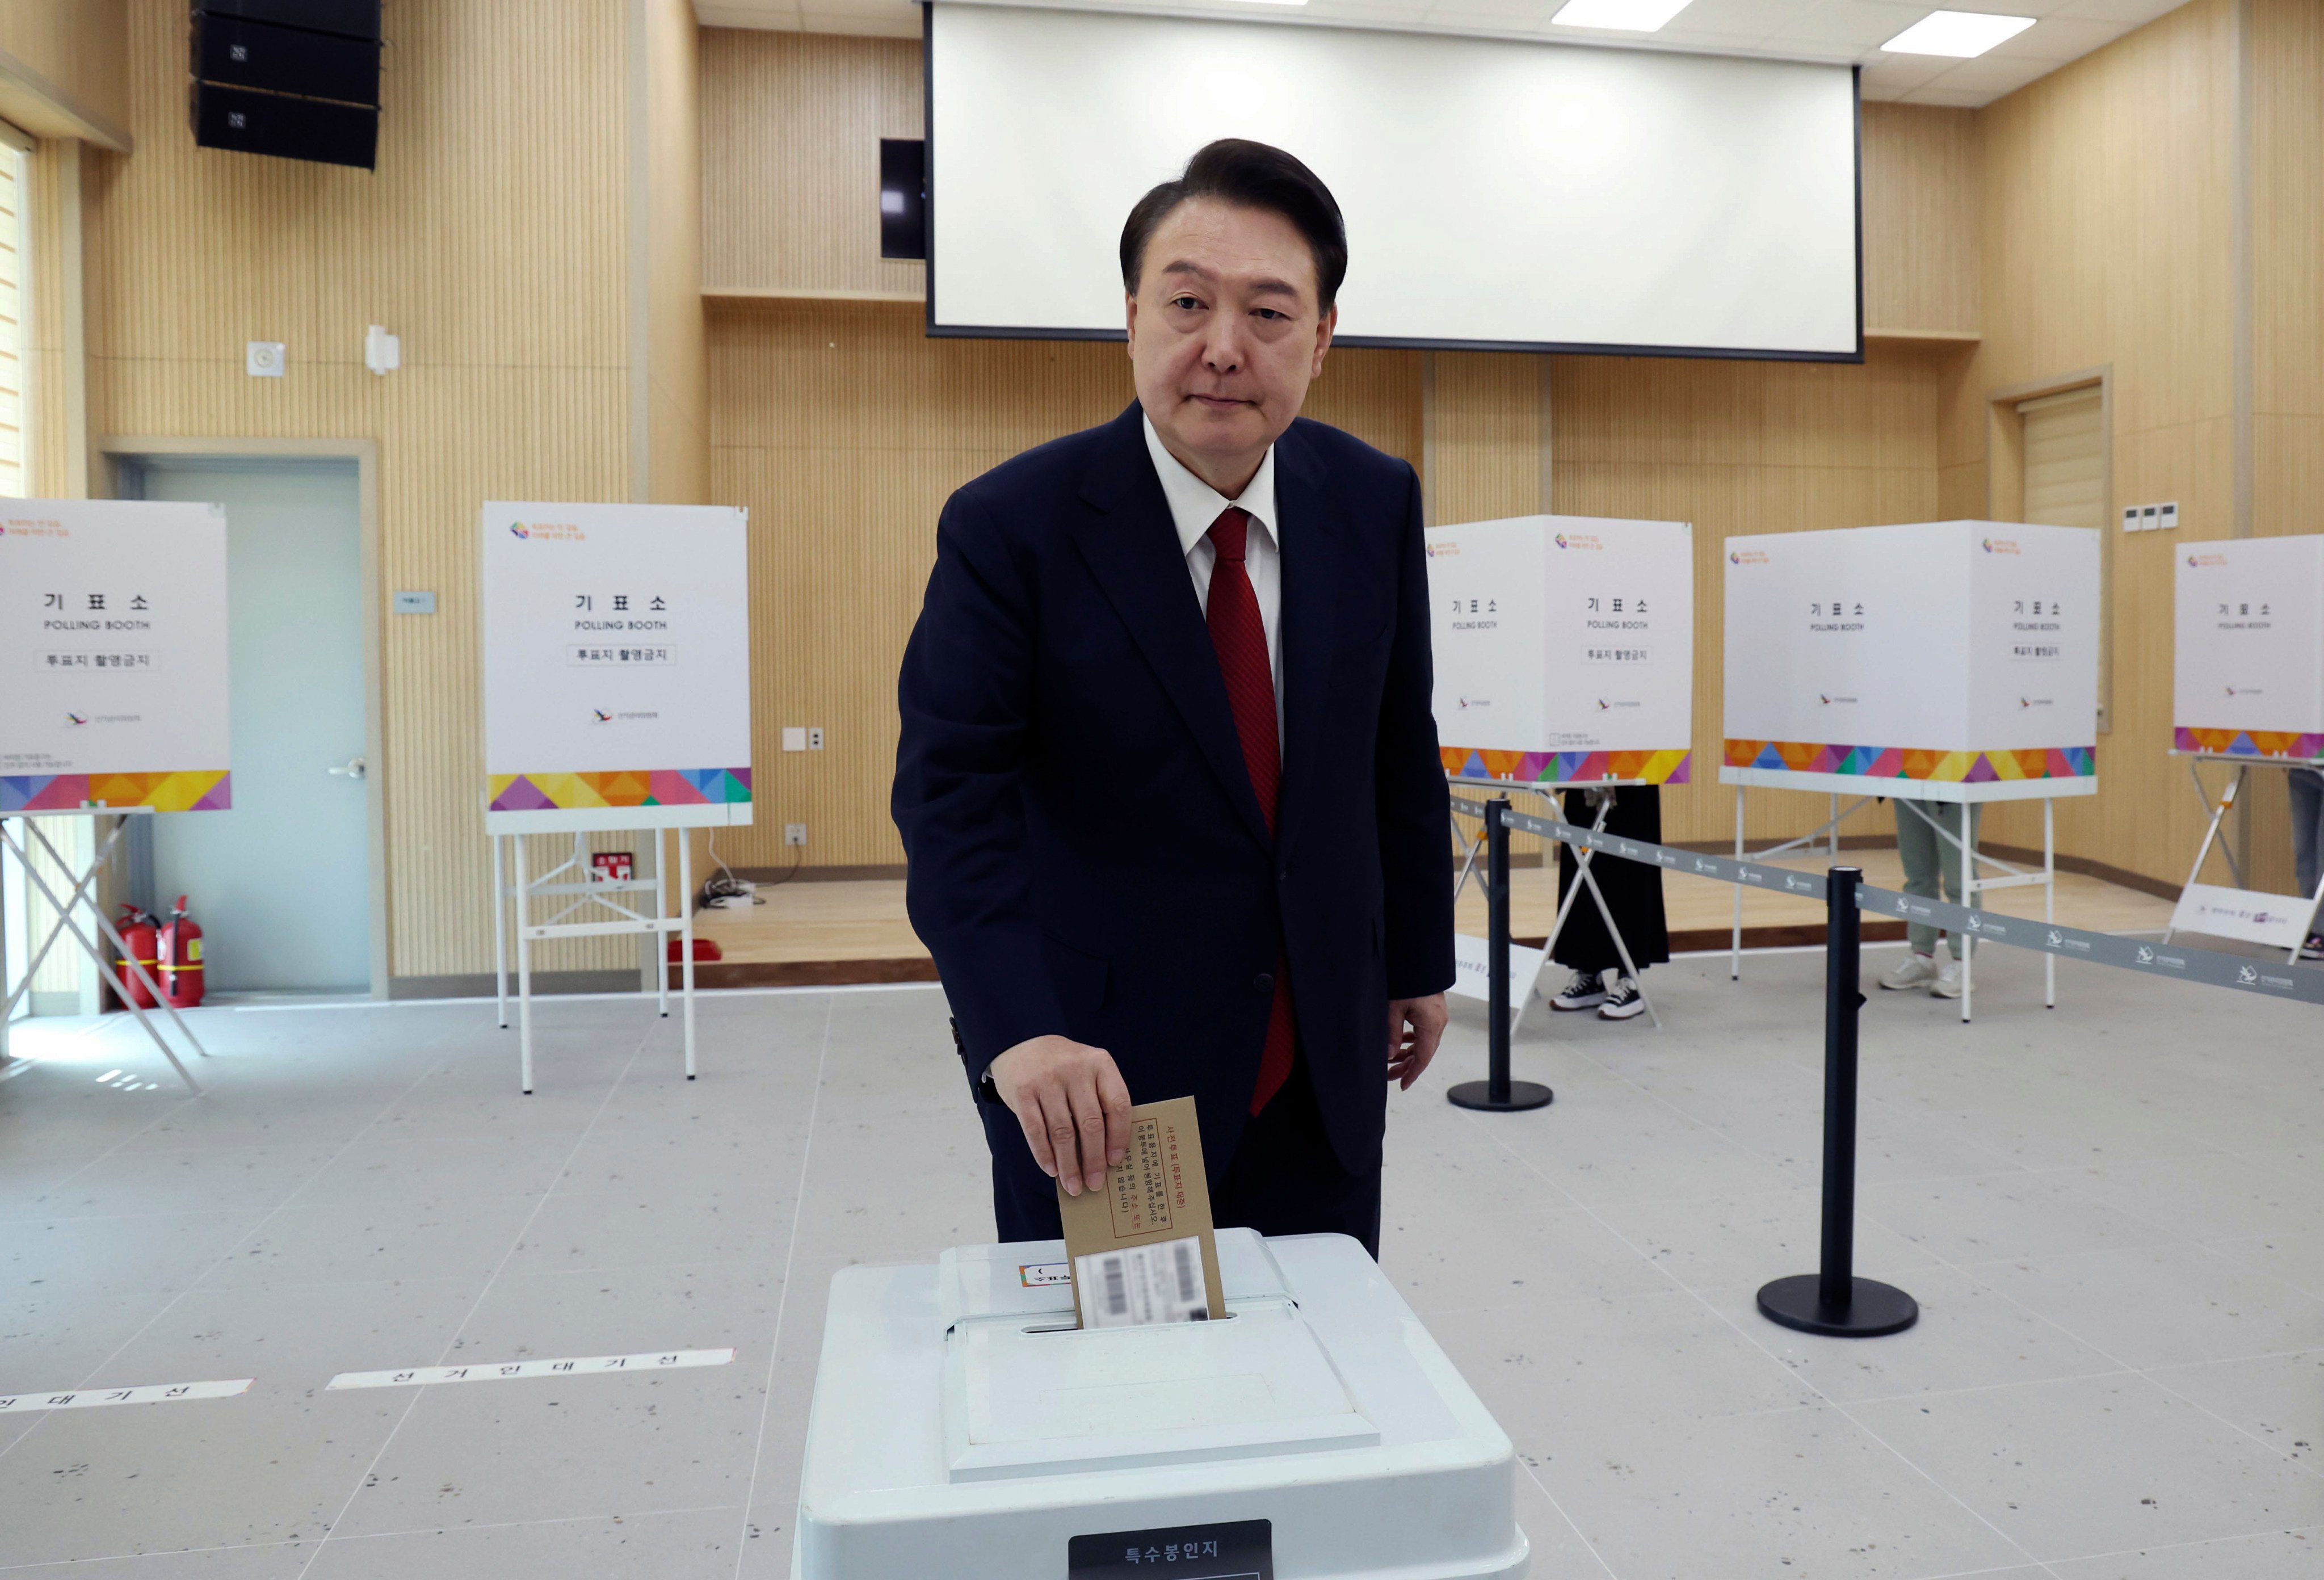 South Korean President Yoon Suk-yeol casts his vote at a polling station in Busan. Yoon’s ruling People Power Party suffered a crushing a defeat in the April 10 general election. Photo: Yonhap via AP